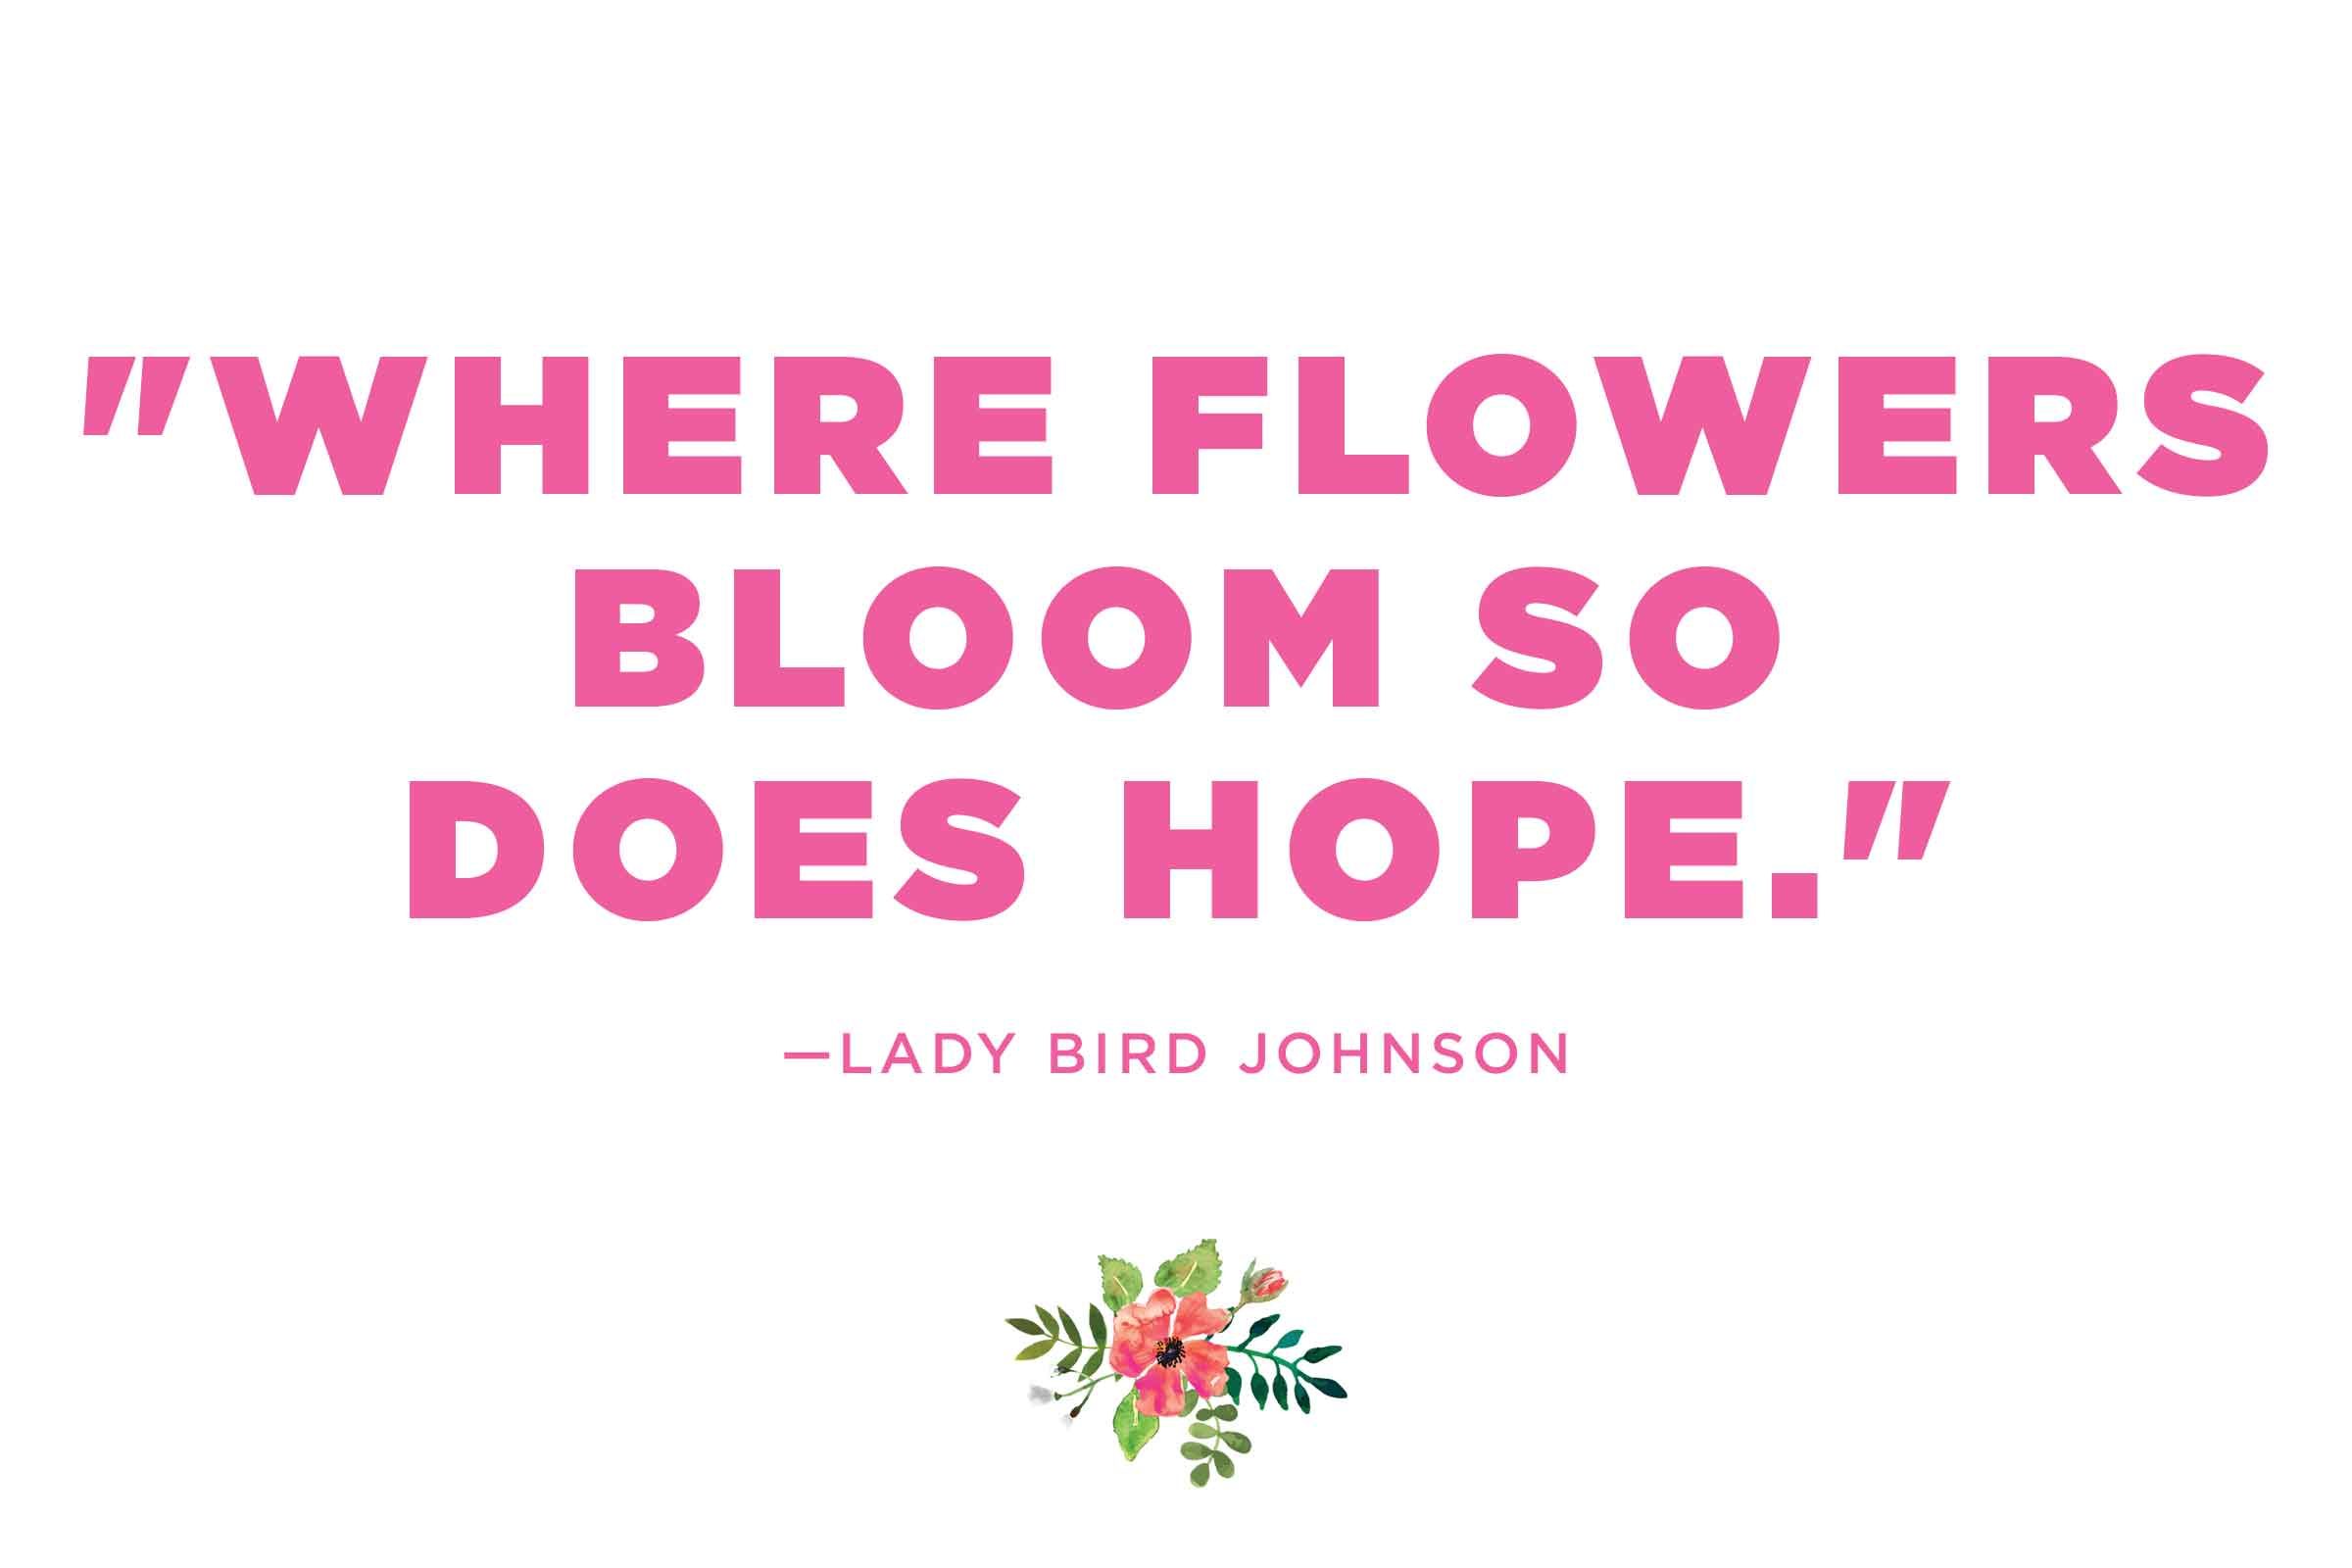 Lady Bird Johnson on the gift of flowers